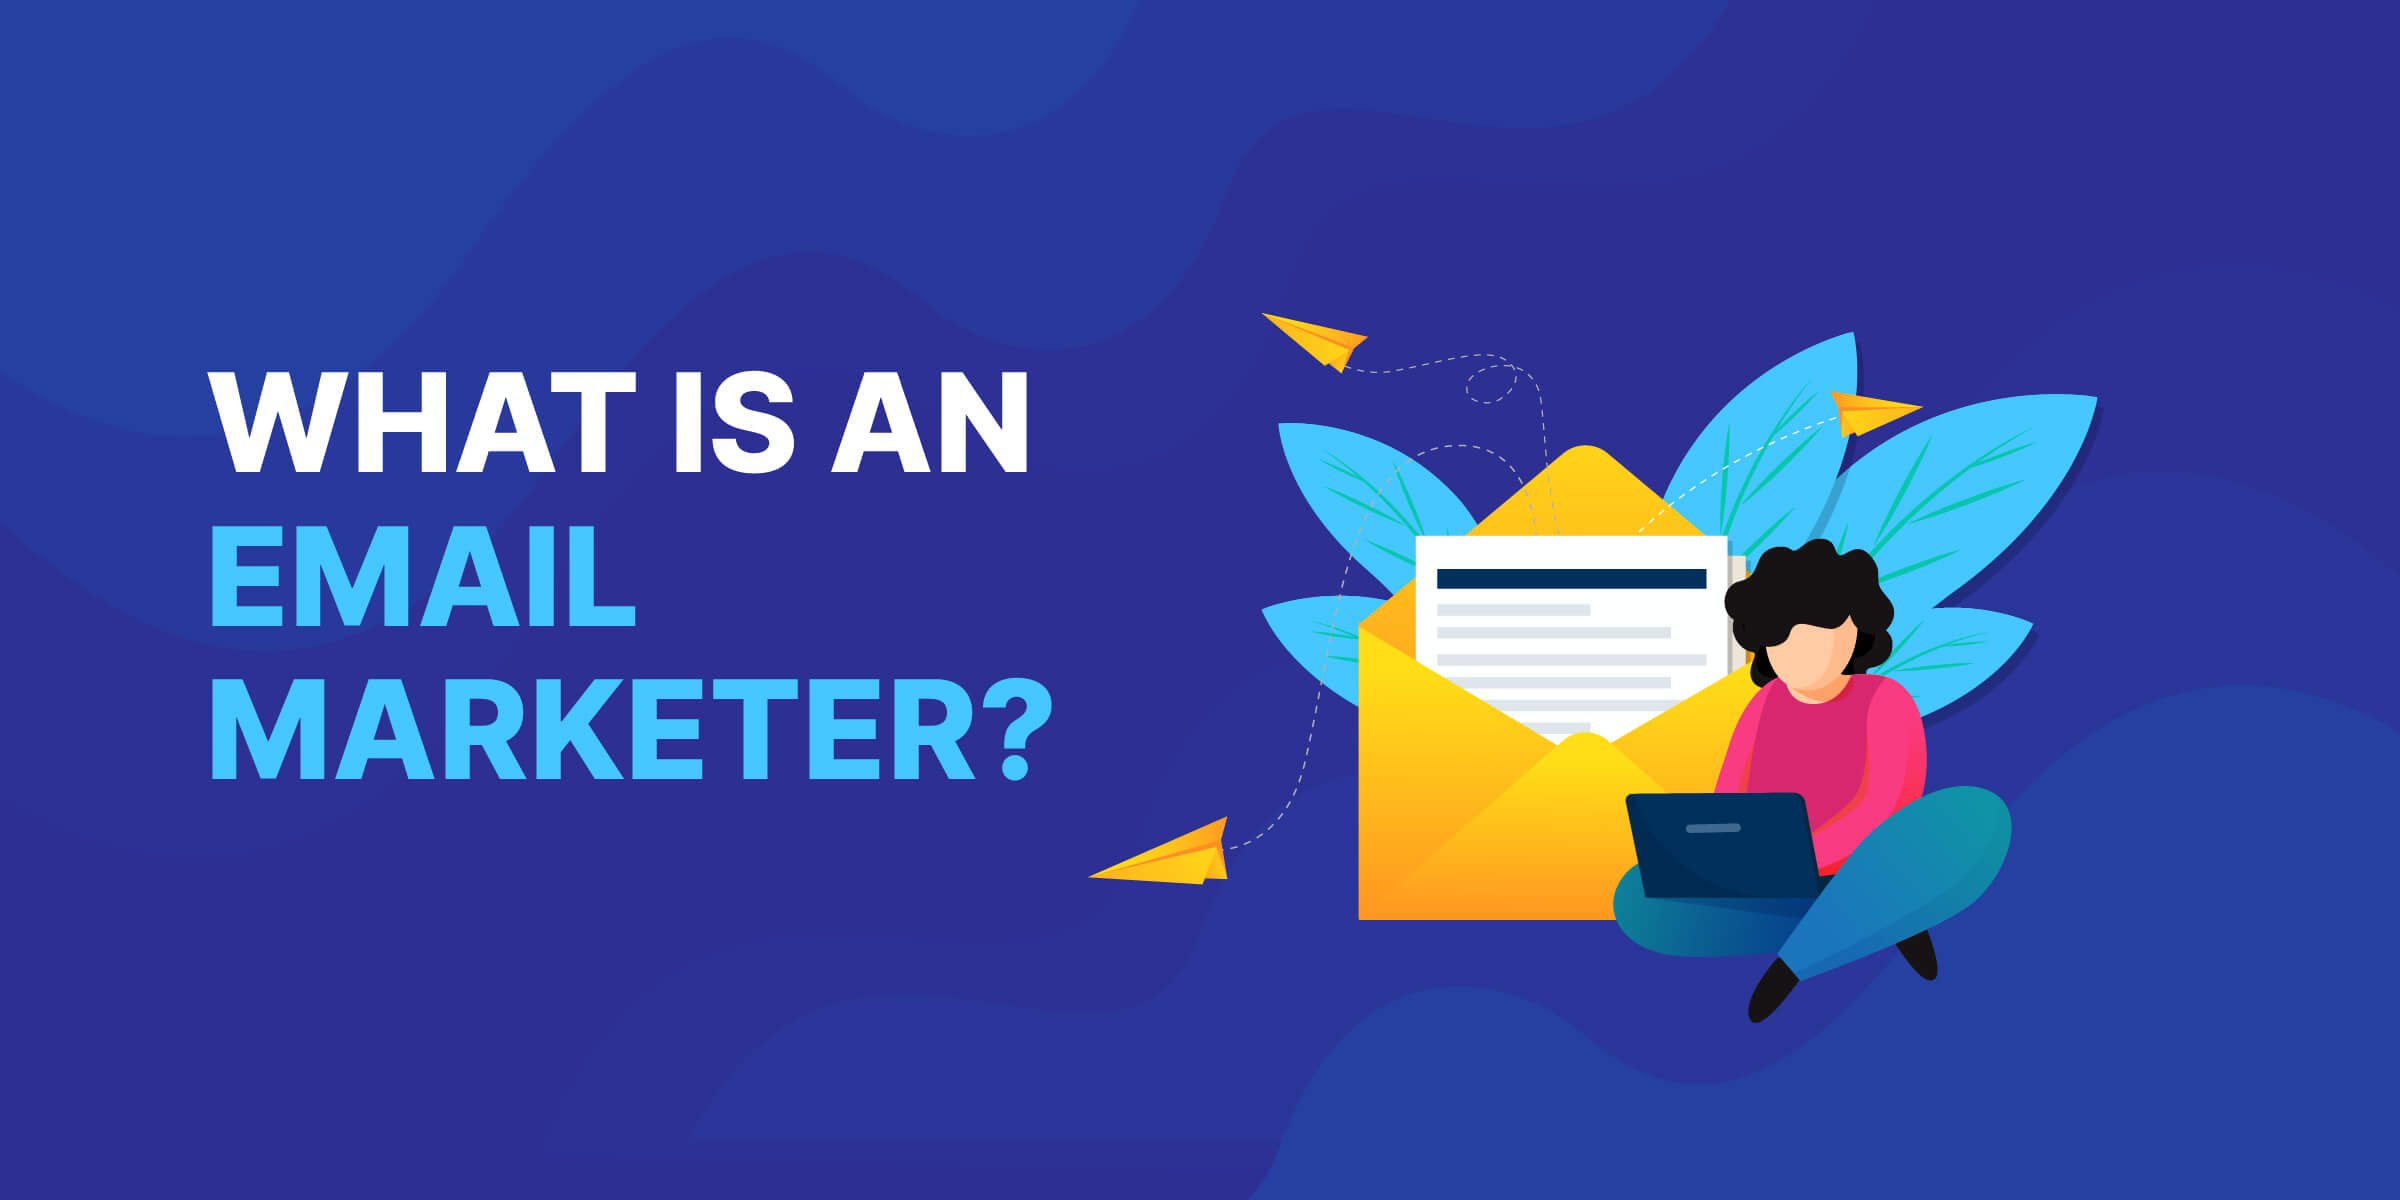 What Is an Email Marketer